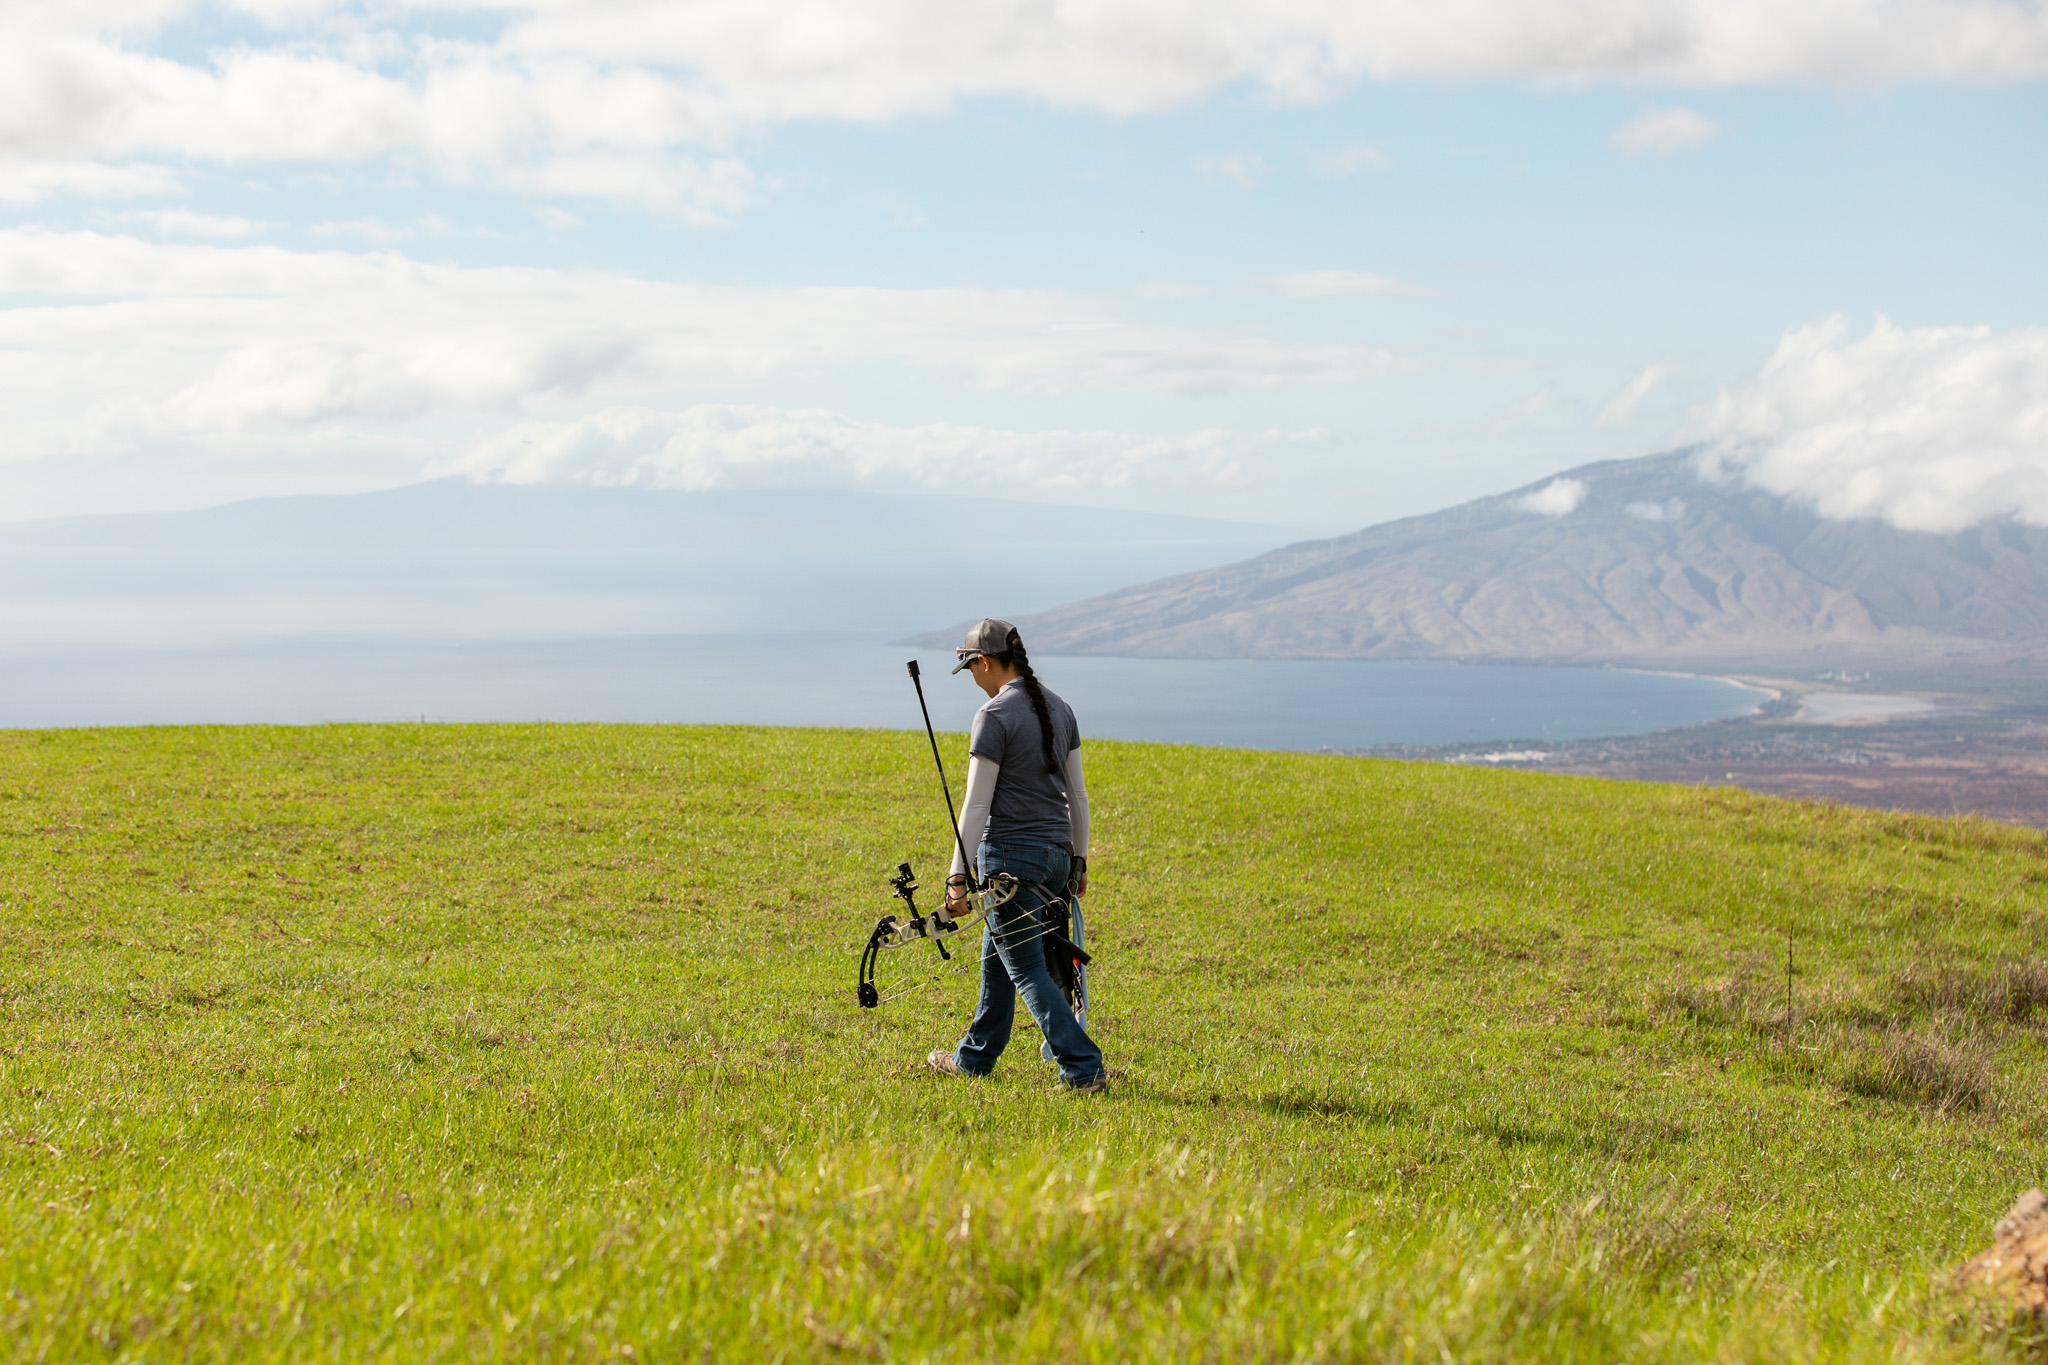 Liko Arreola walking with her bow in a grassy field overlooking the ocean on Maui.